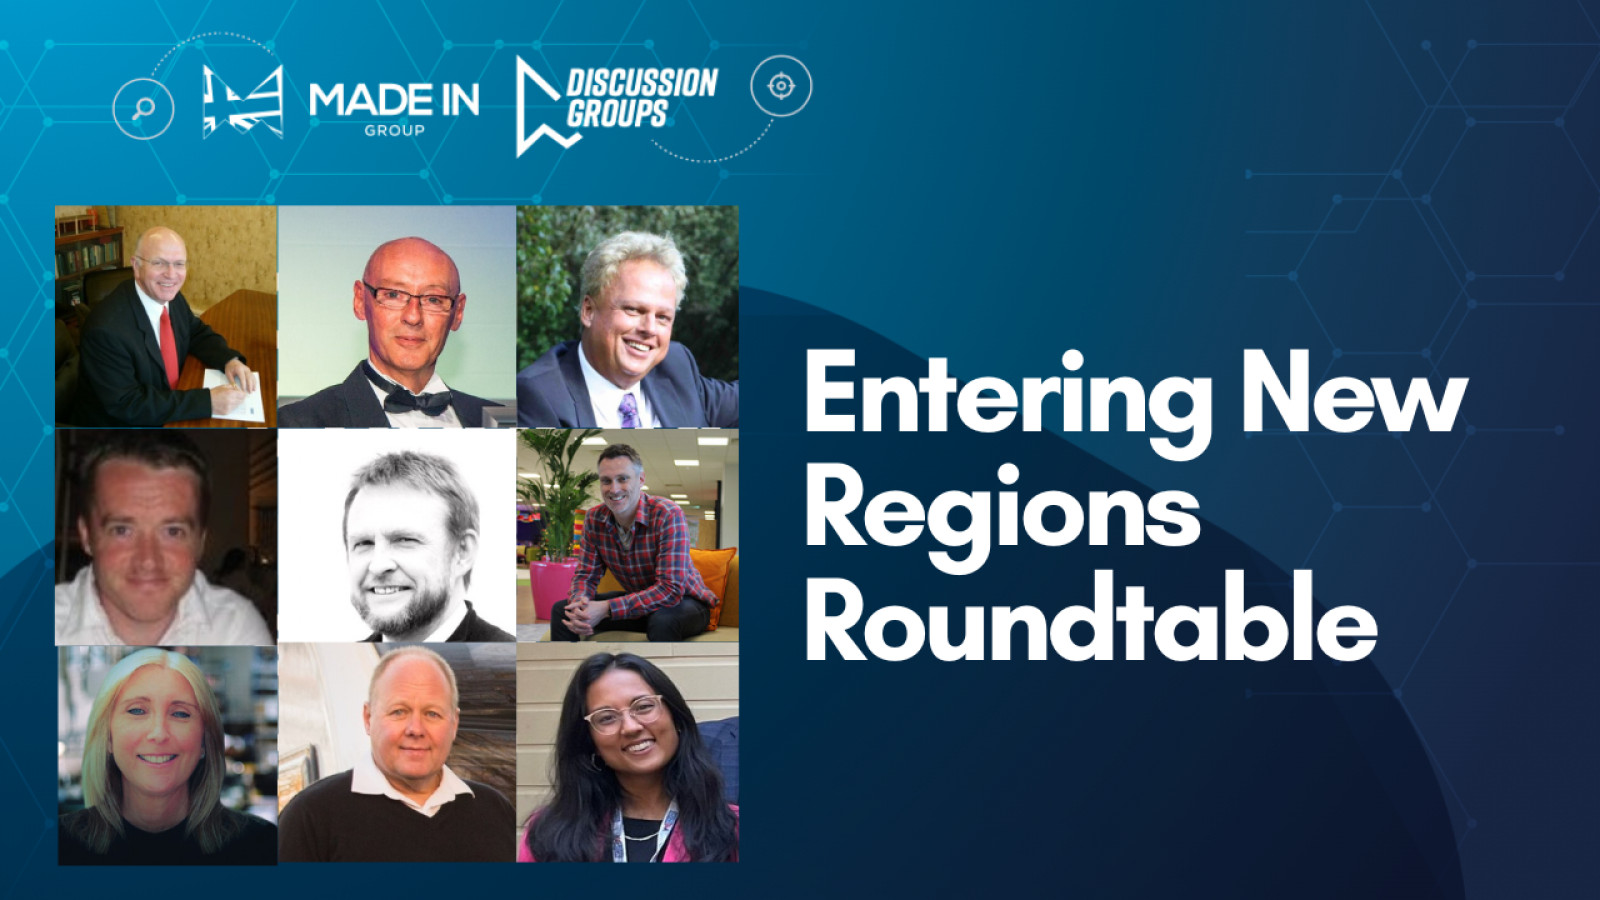 Industry Leaders Talk Entering New Regions in Latest Roundtable Discussion